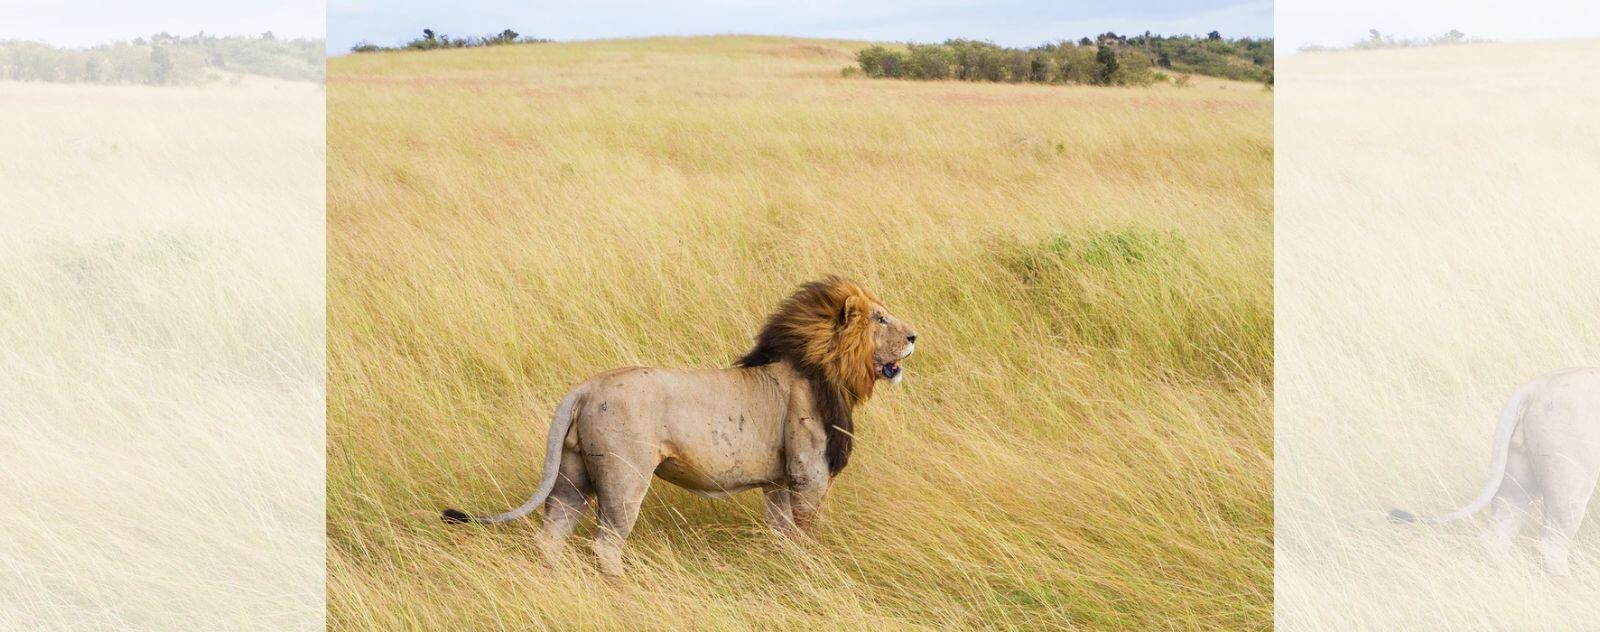 Lion in the African Bush Amid Tall Grass in the Wind